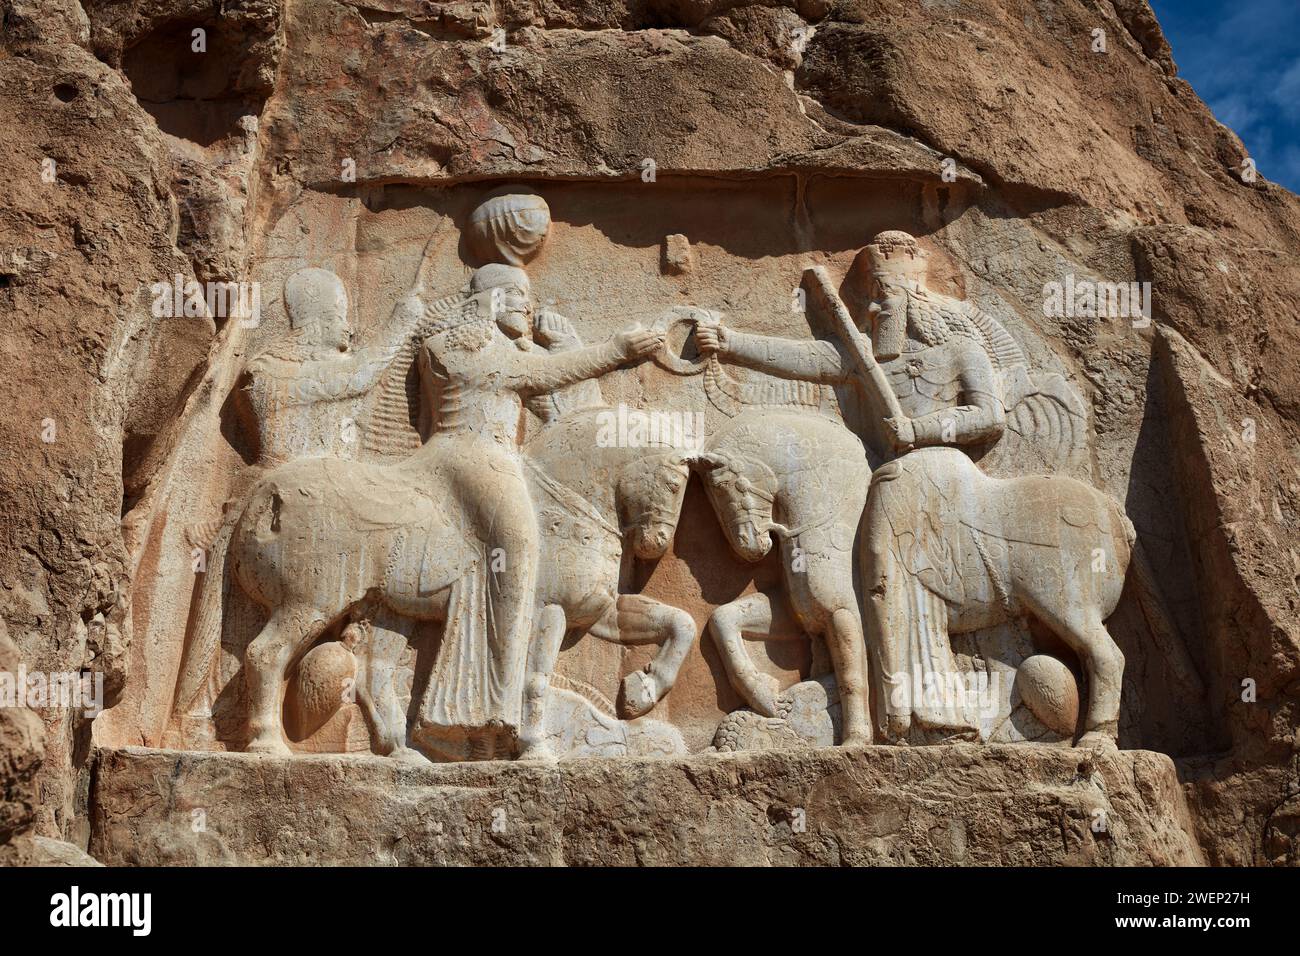 The Investiture of Ardashir I, relief depicts the Persian king Ardashir I receiving the sovereignty ring from god Ahura Mazda. Naqsh-e Rostam, Iran. Stock Photo